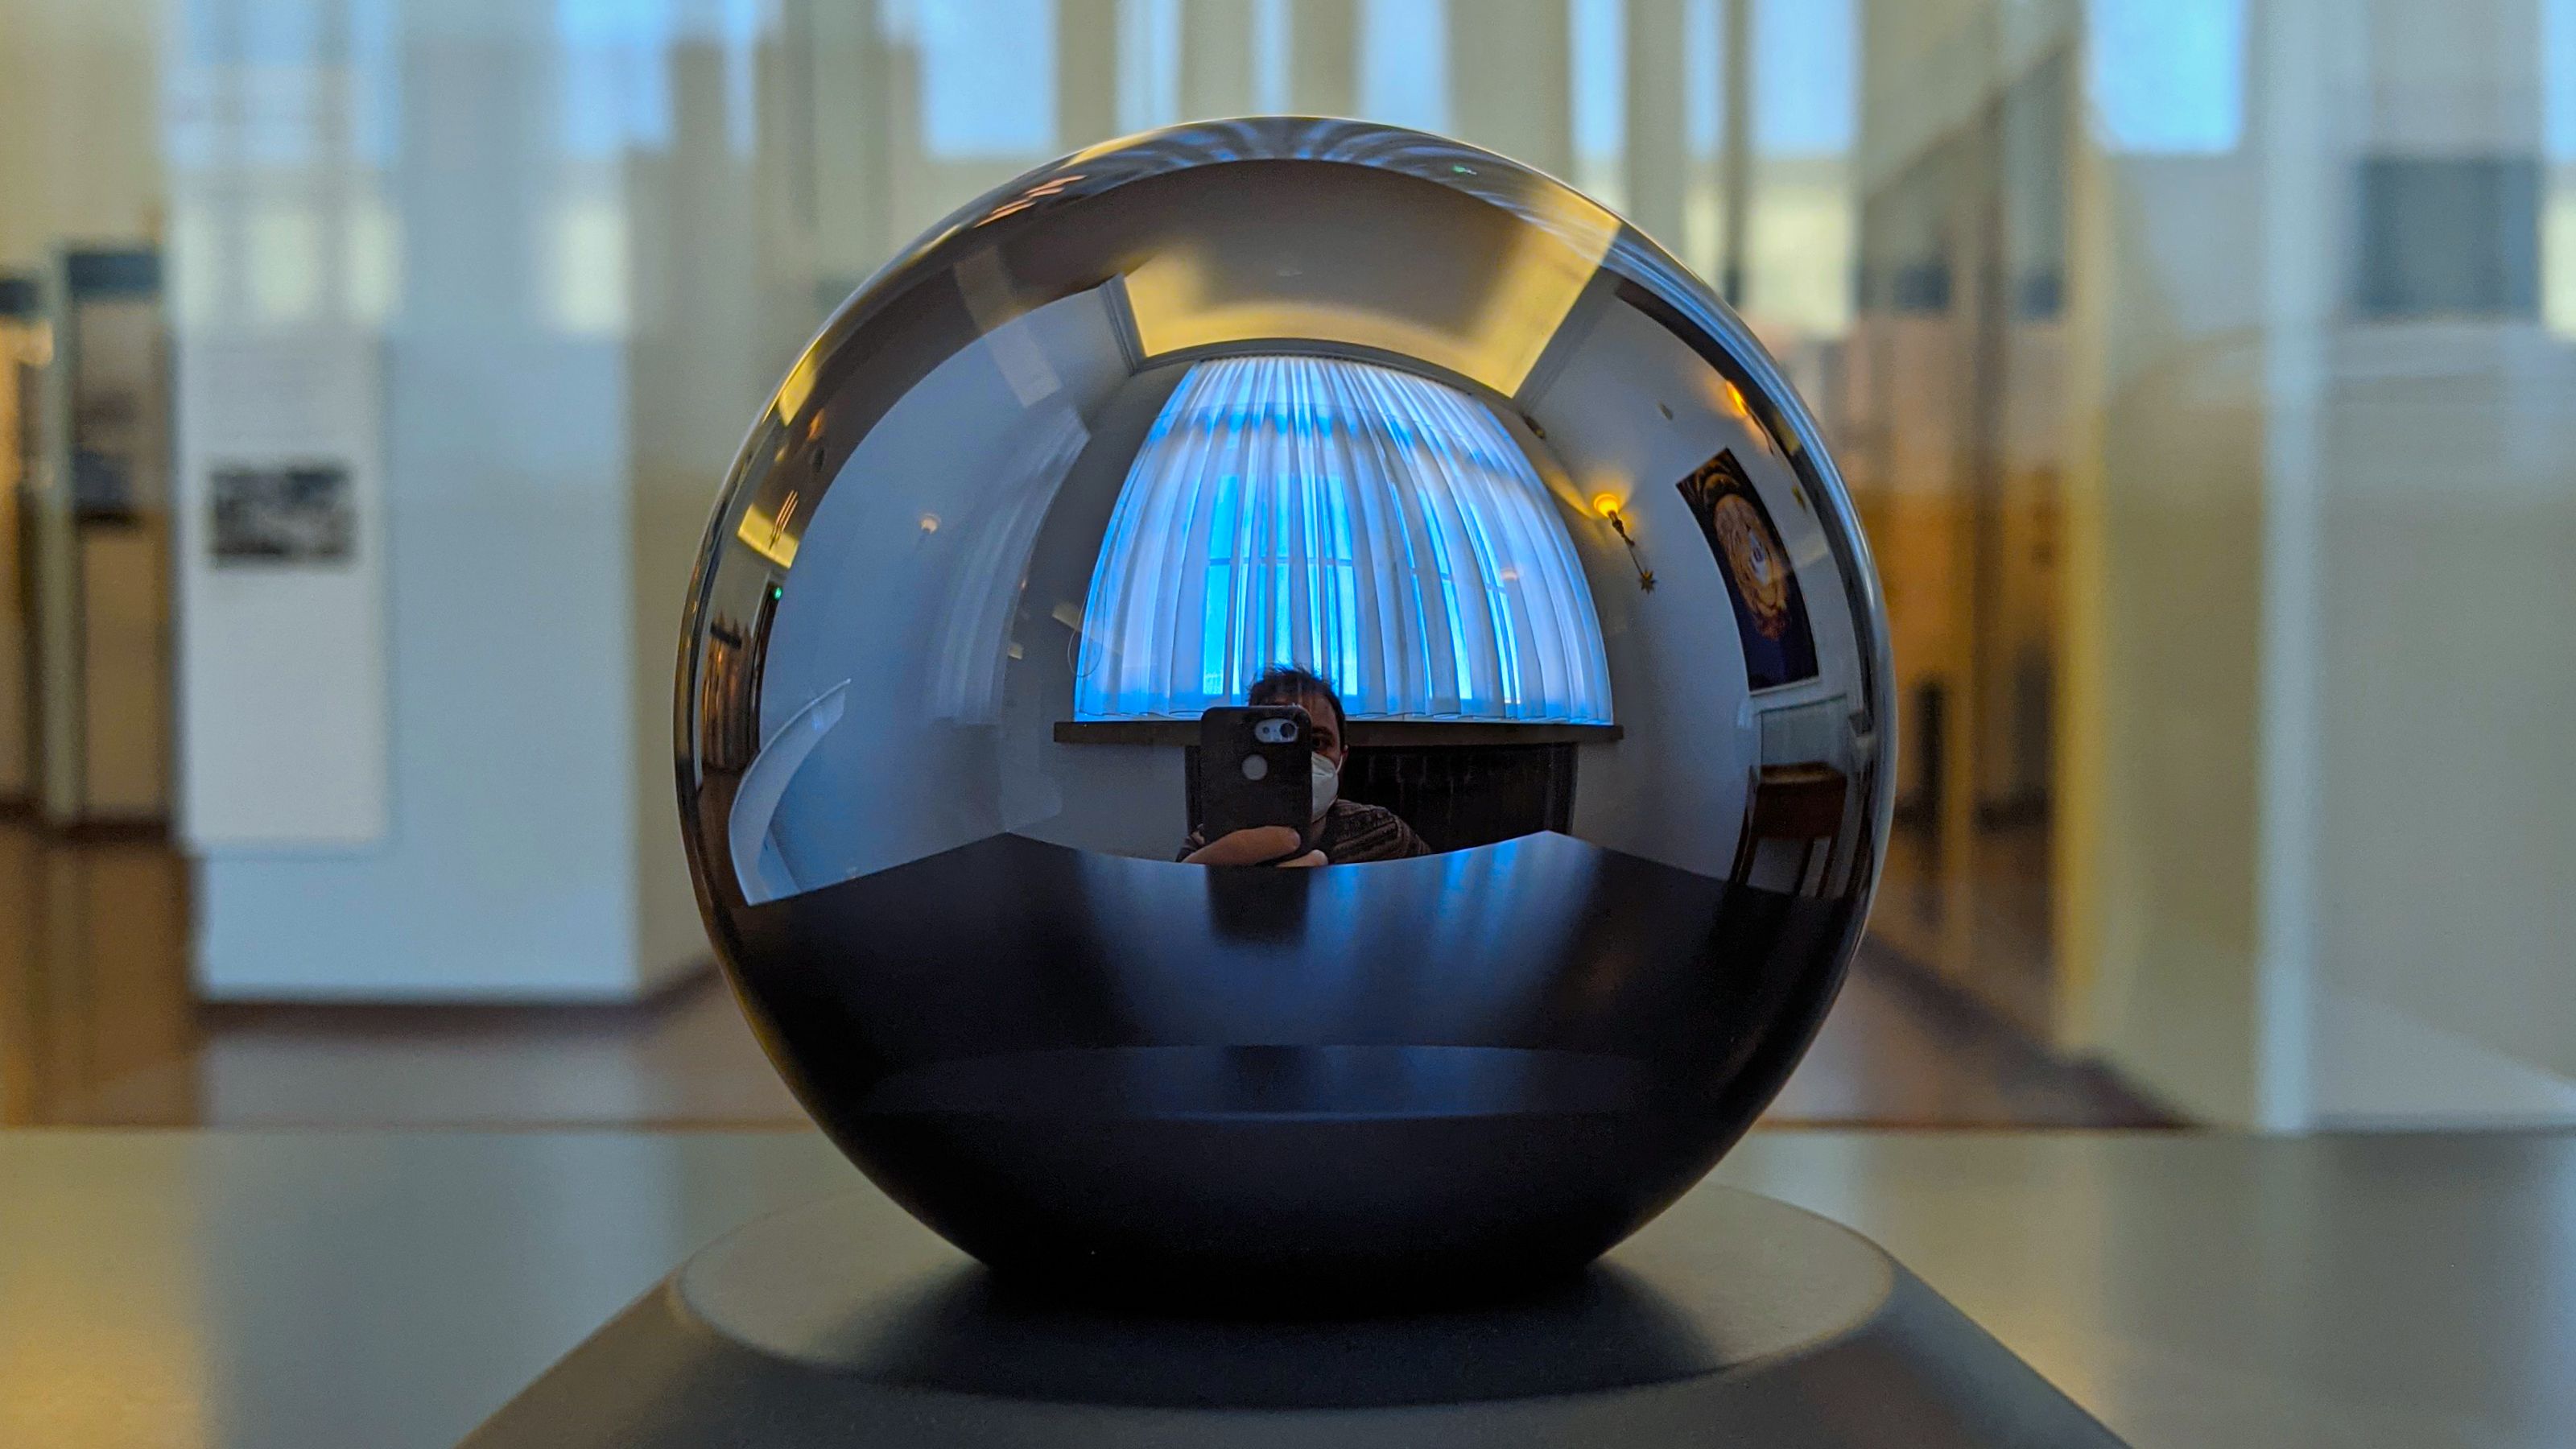 A highly reflective spherical object on display, with distorted reflections of a room and a person taking the photo.